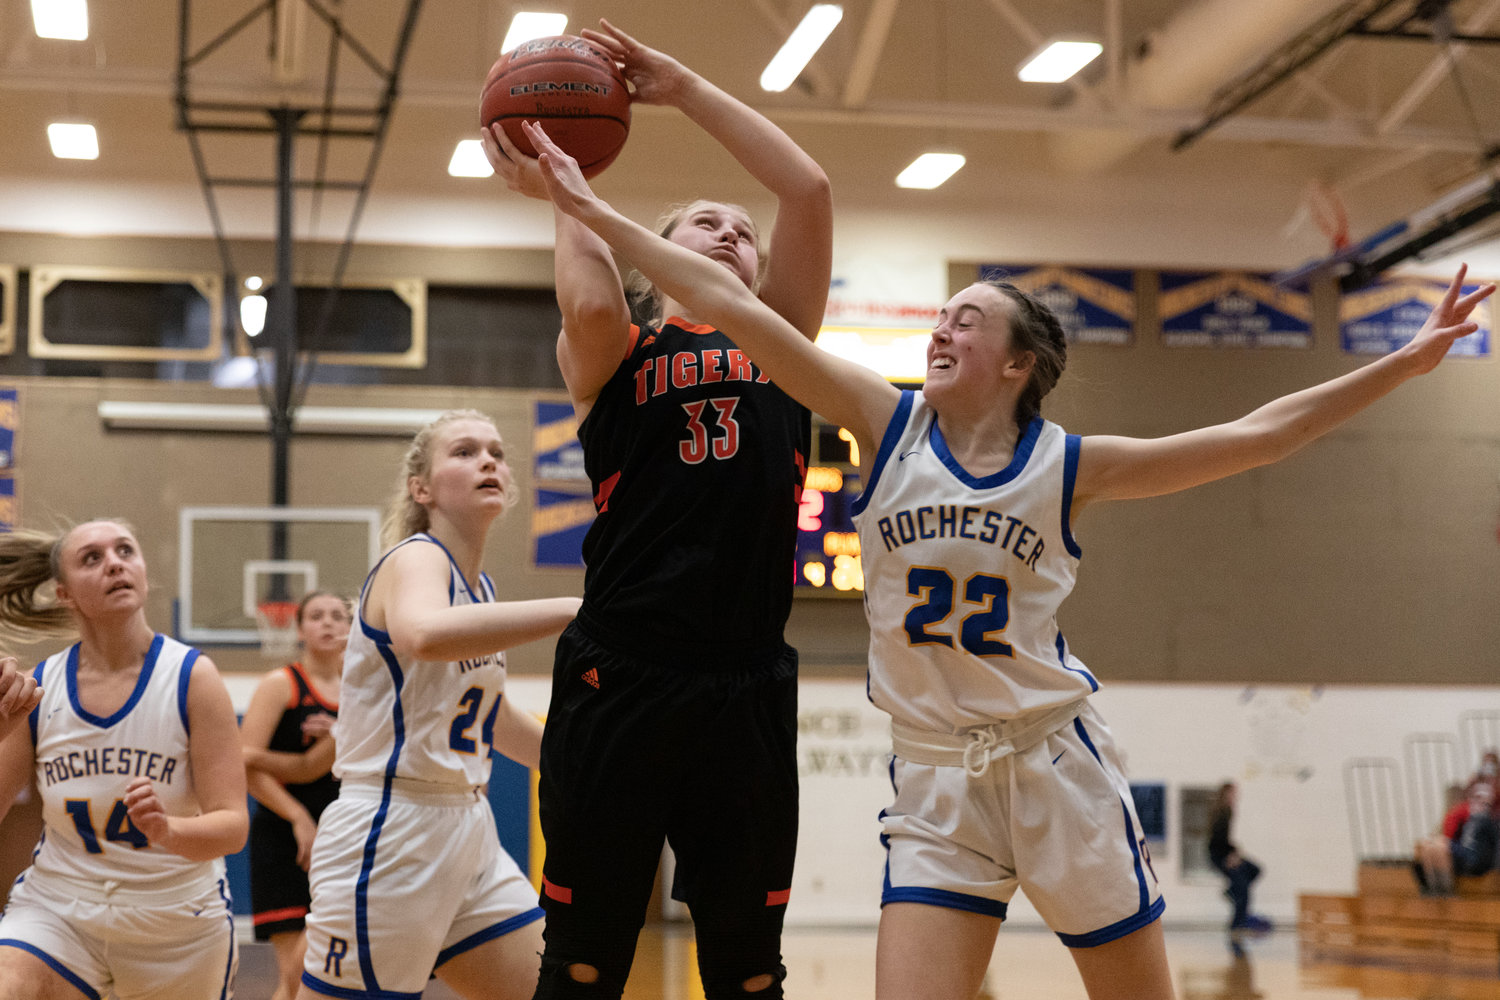 Centralia sophomore post Emily Wilkerson is fouled attempting a layup against Rochester Dec. 9.